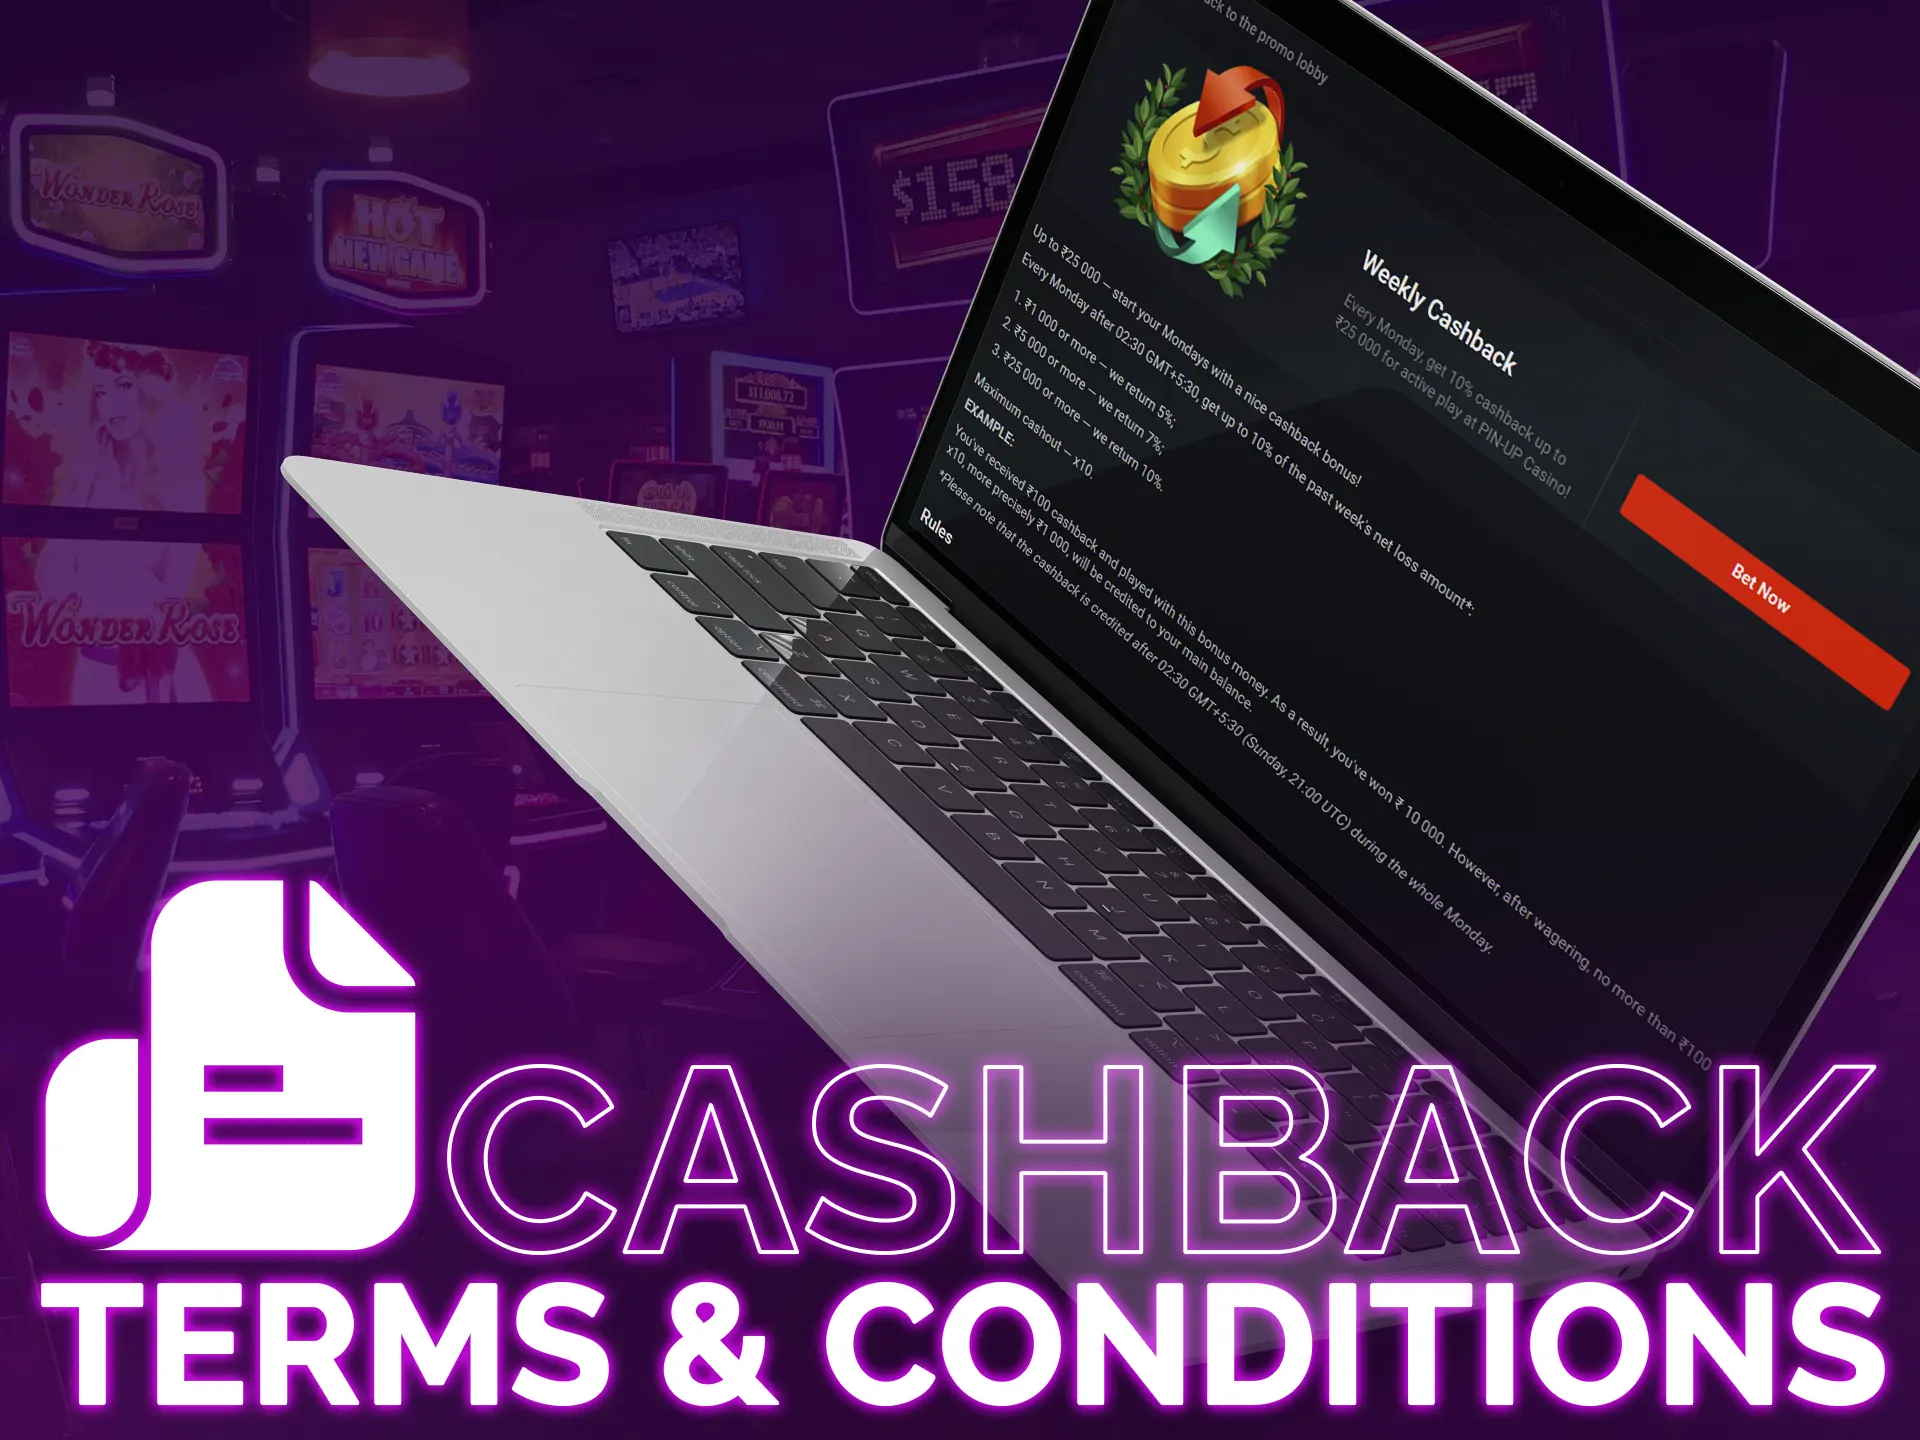 Learn terms and conditions, and get yours cashback.